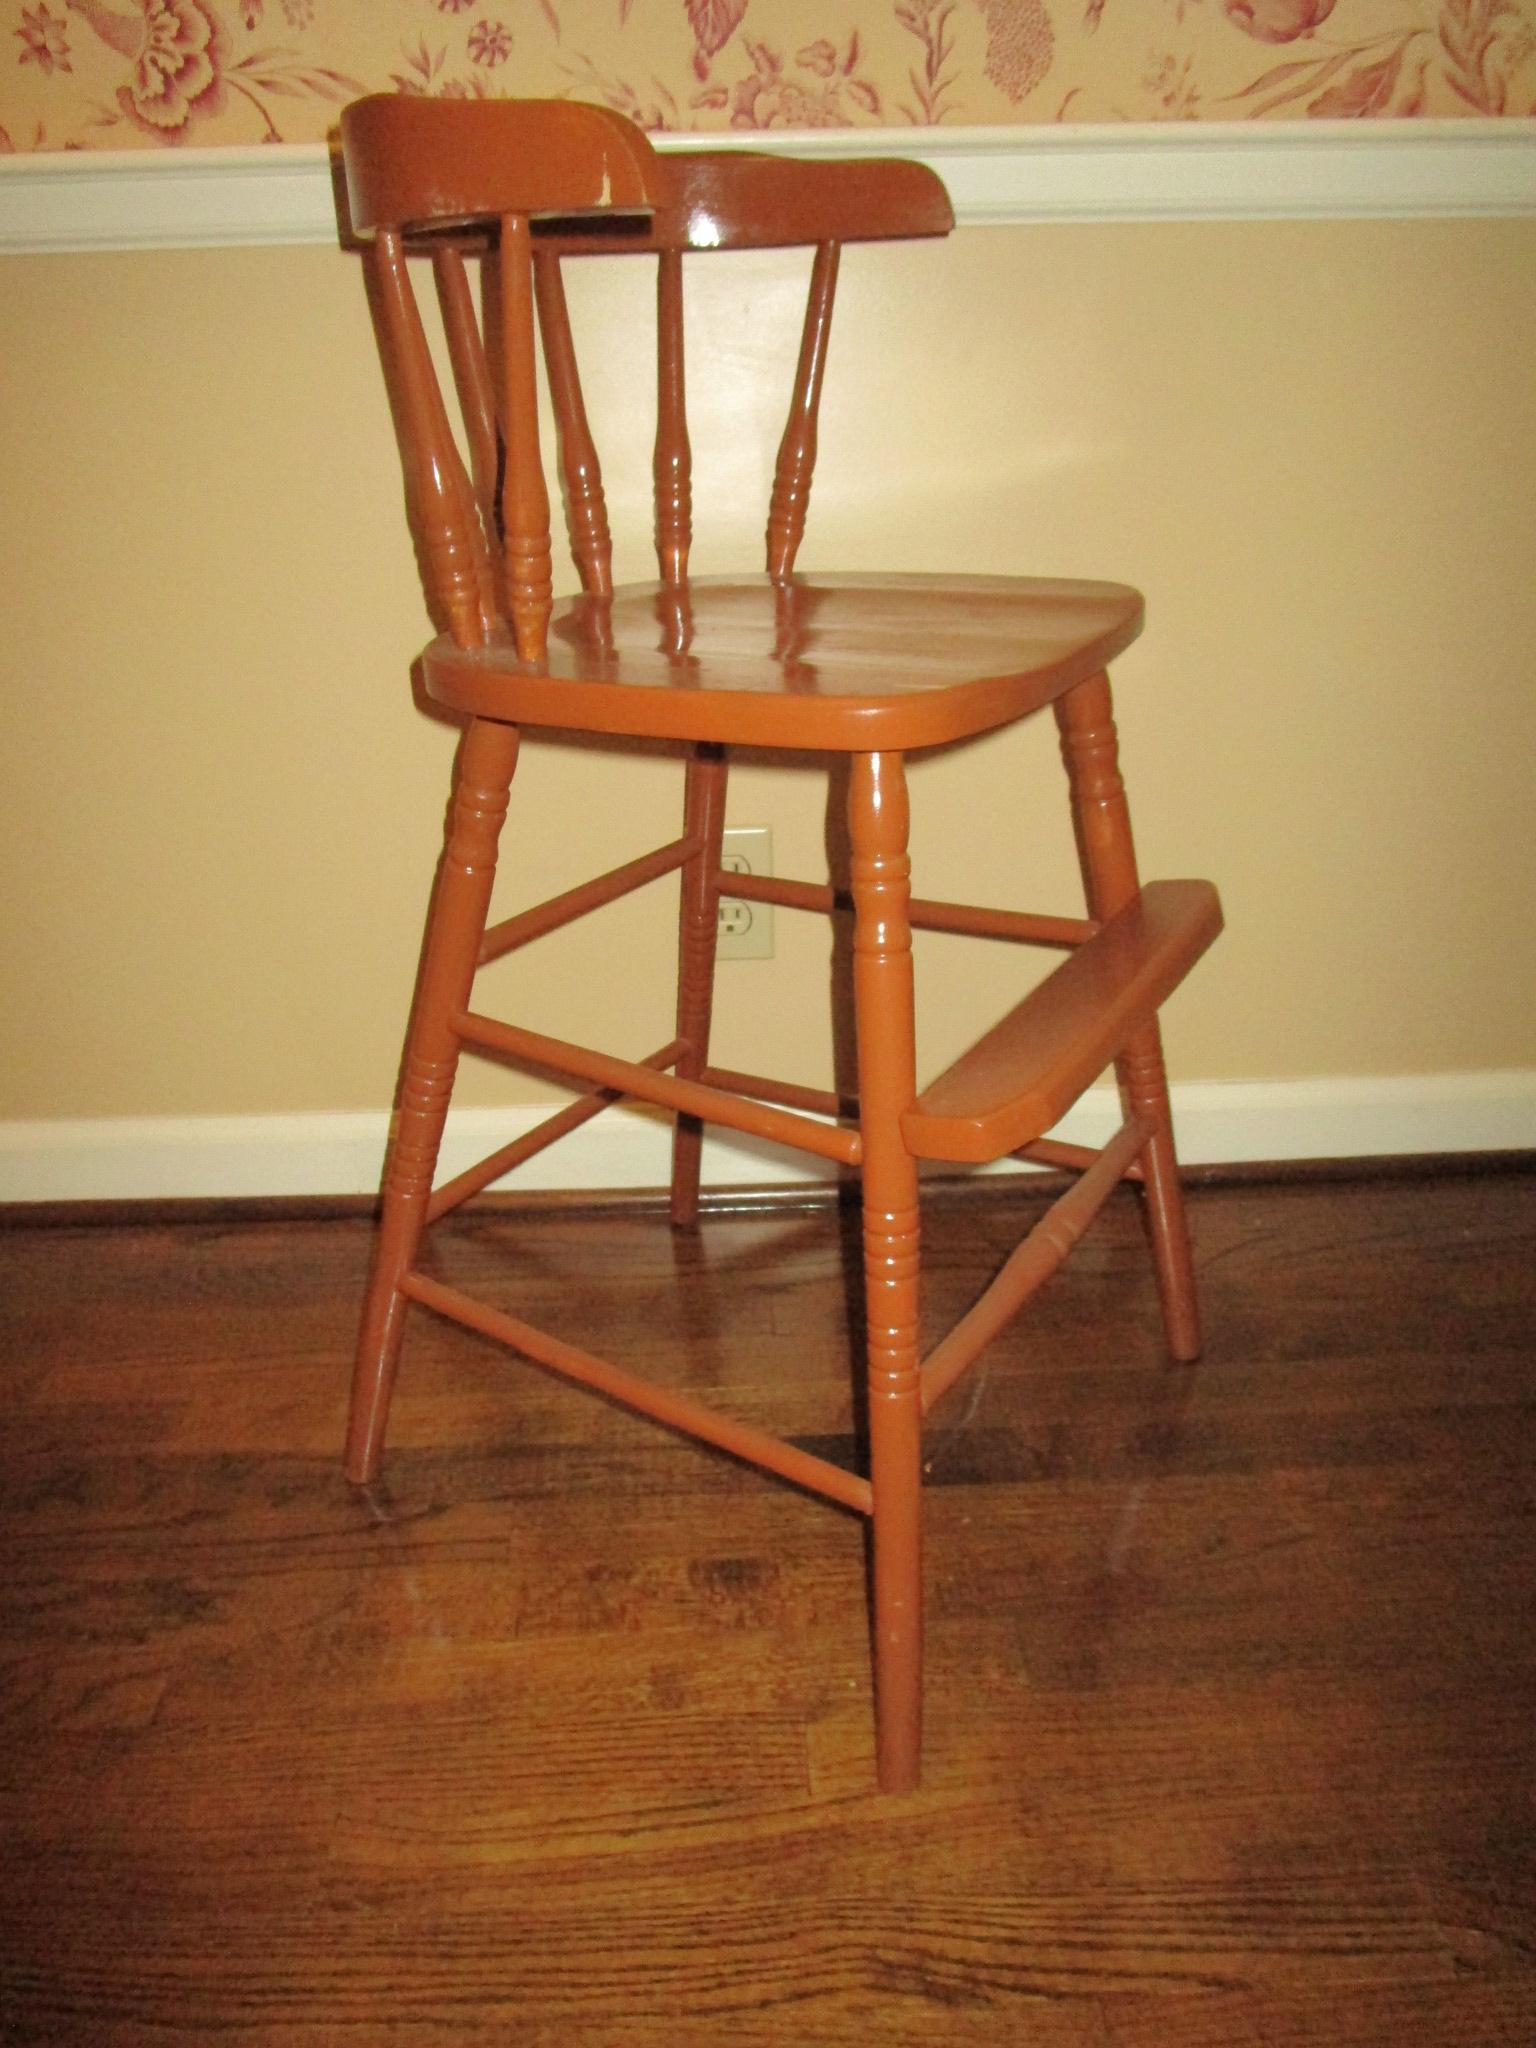 Child's Wooden Highchair - No tray, some loss on finish